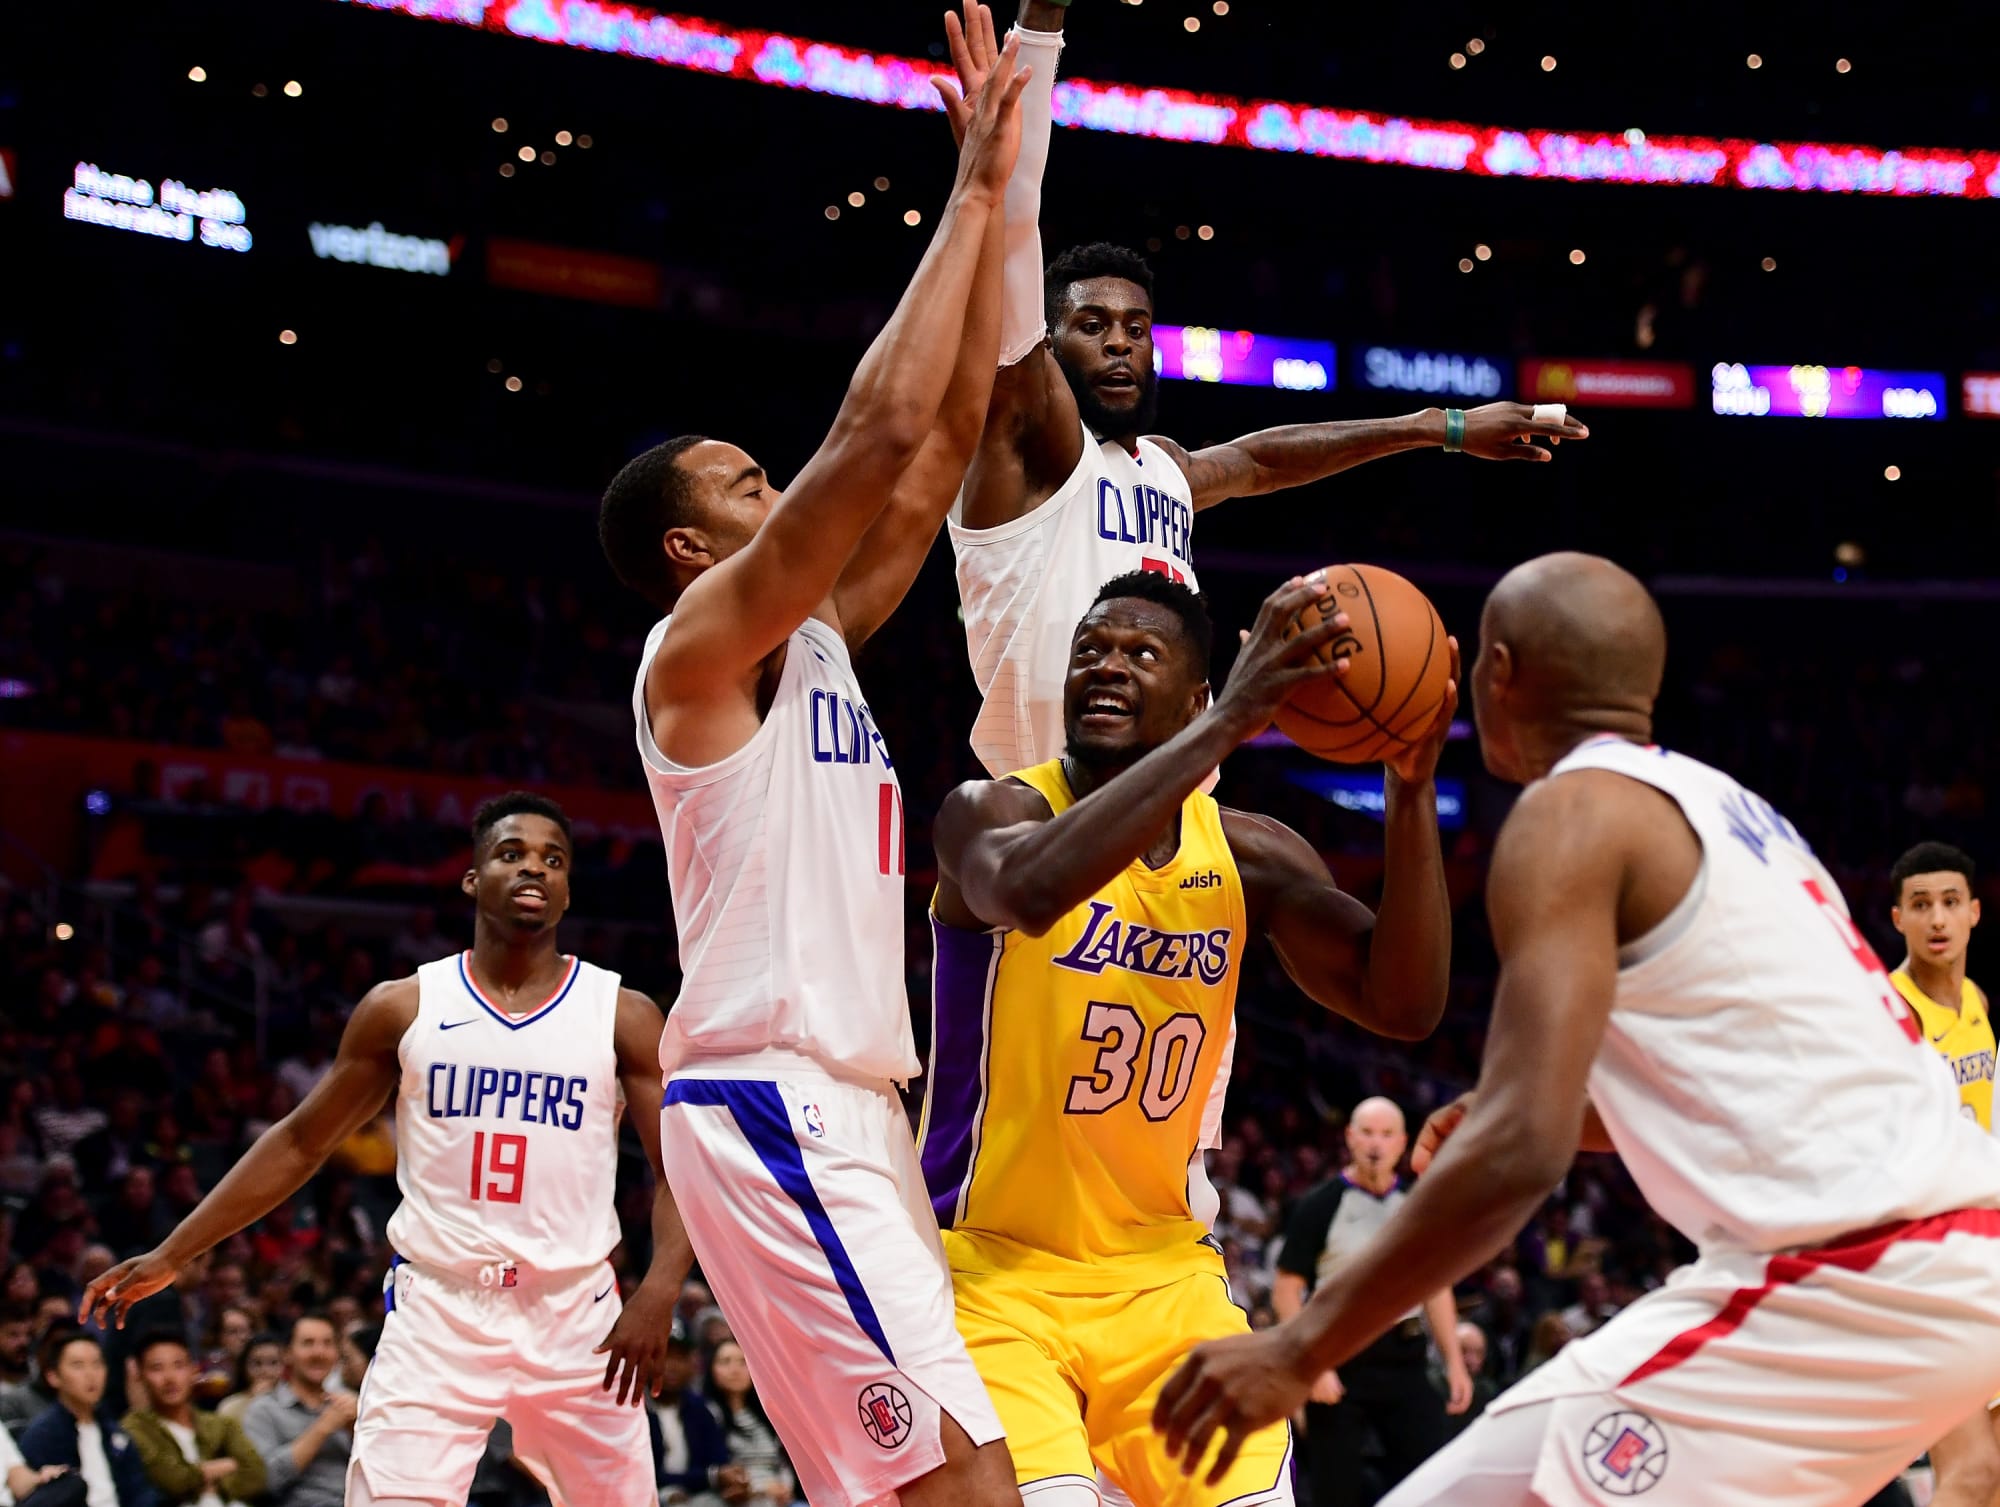 Lakers Which power forward deserves the starting nod?